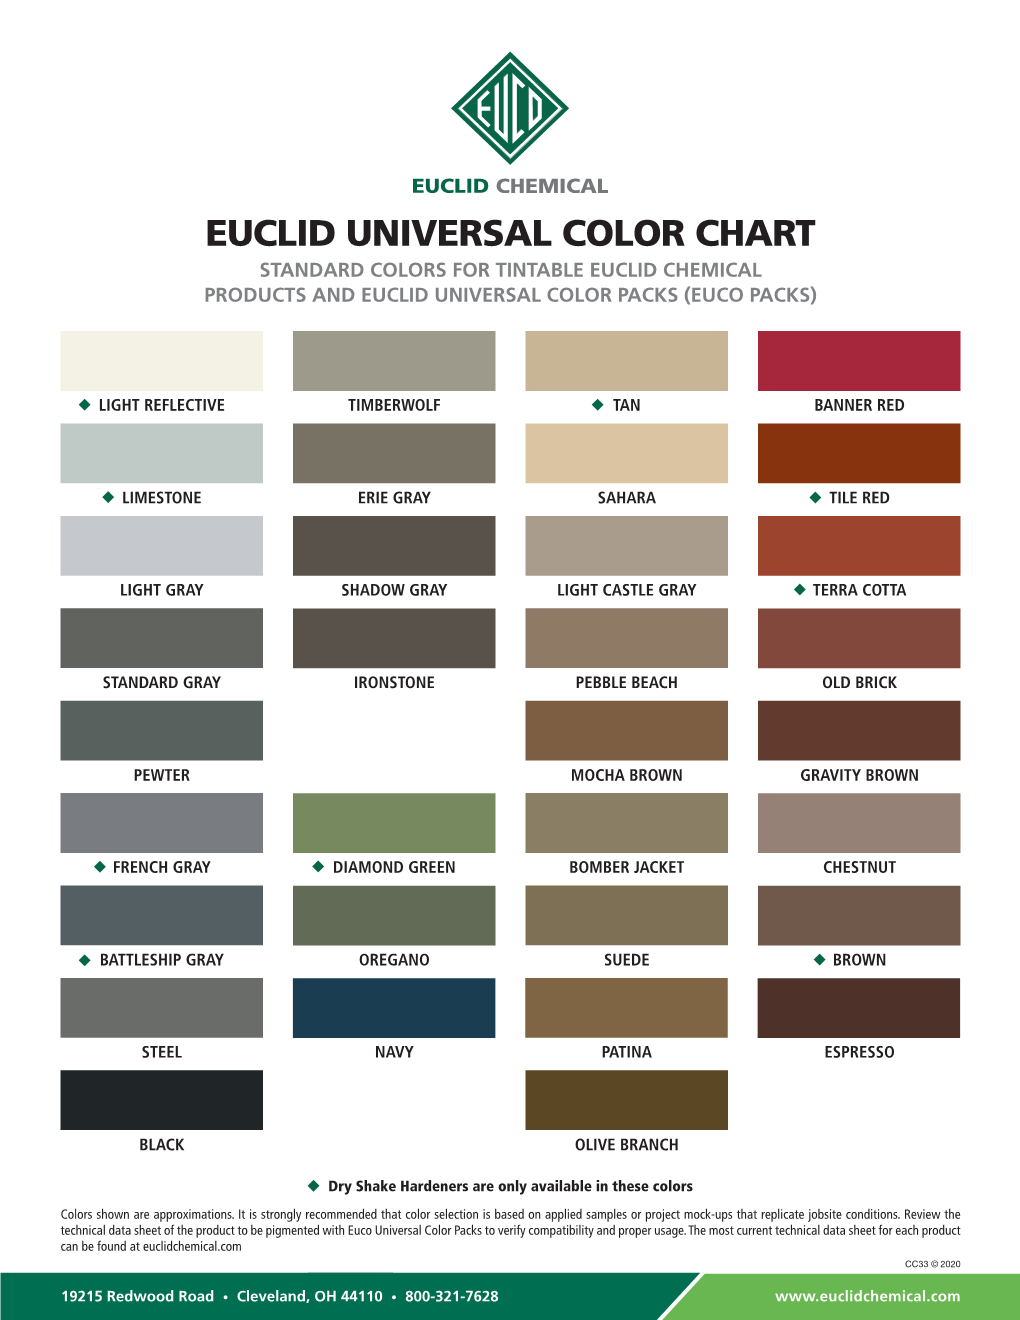 Euclid Universal Color Chart Standard Colors for Tintable Euclid Chemical Products and Euclid Universal Color Packs (Euco Packs)